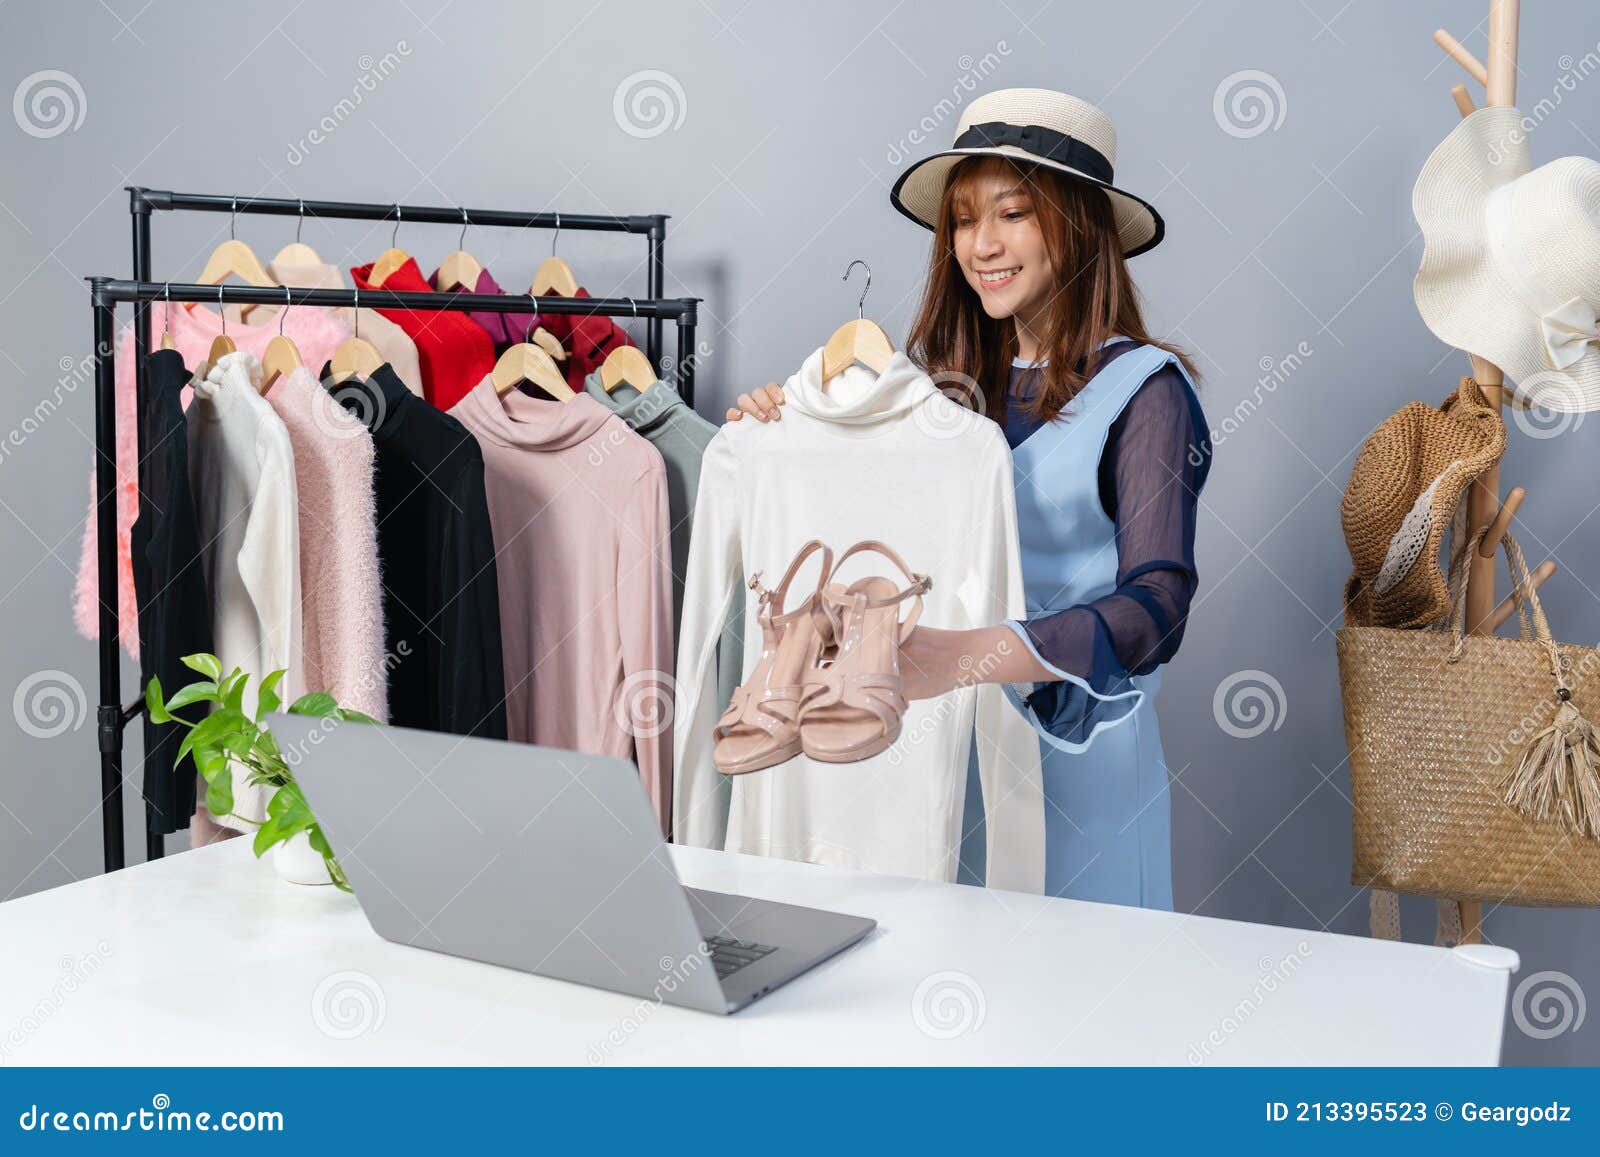 Woman Selling Clothes and Accessories Online by Laptop Computer Live Streaming, Business Online E-commerce at Home Stock Image